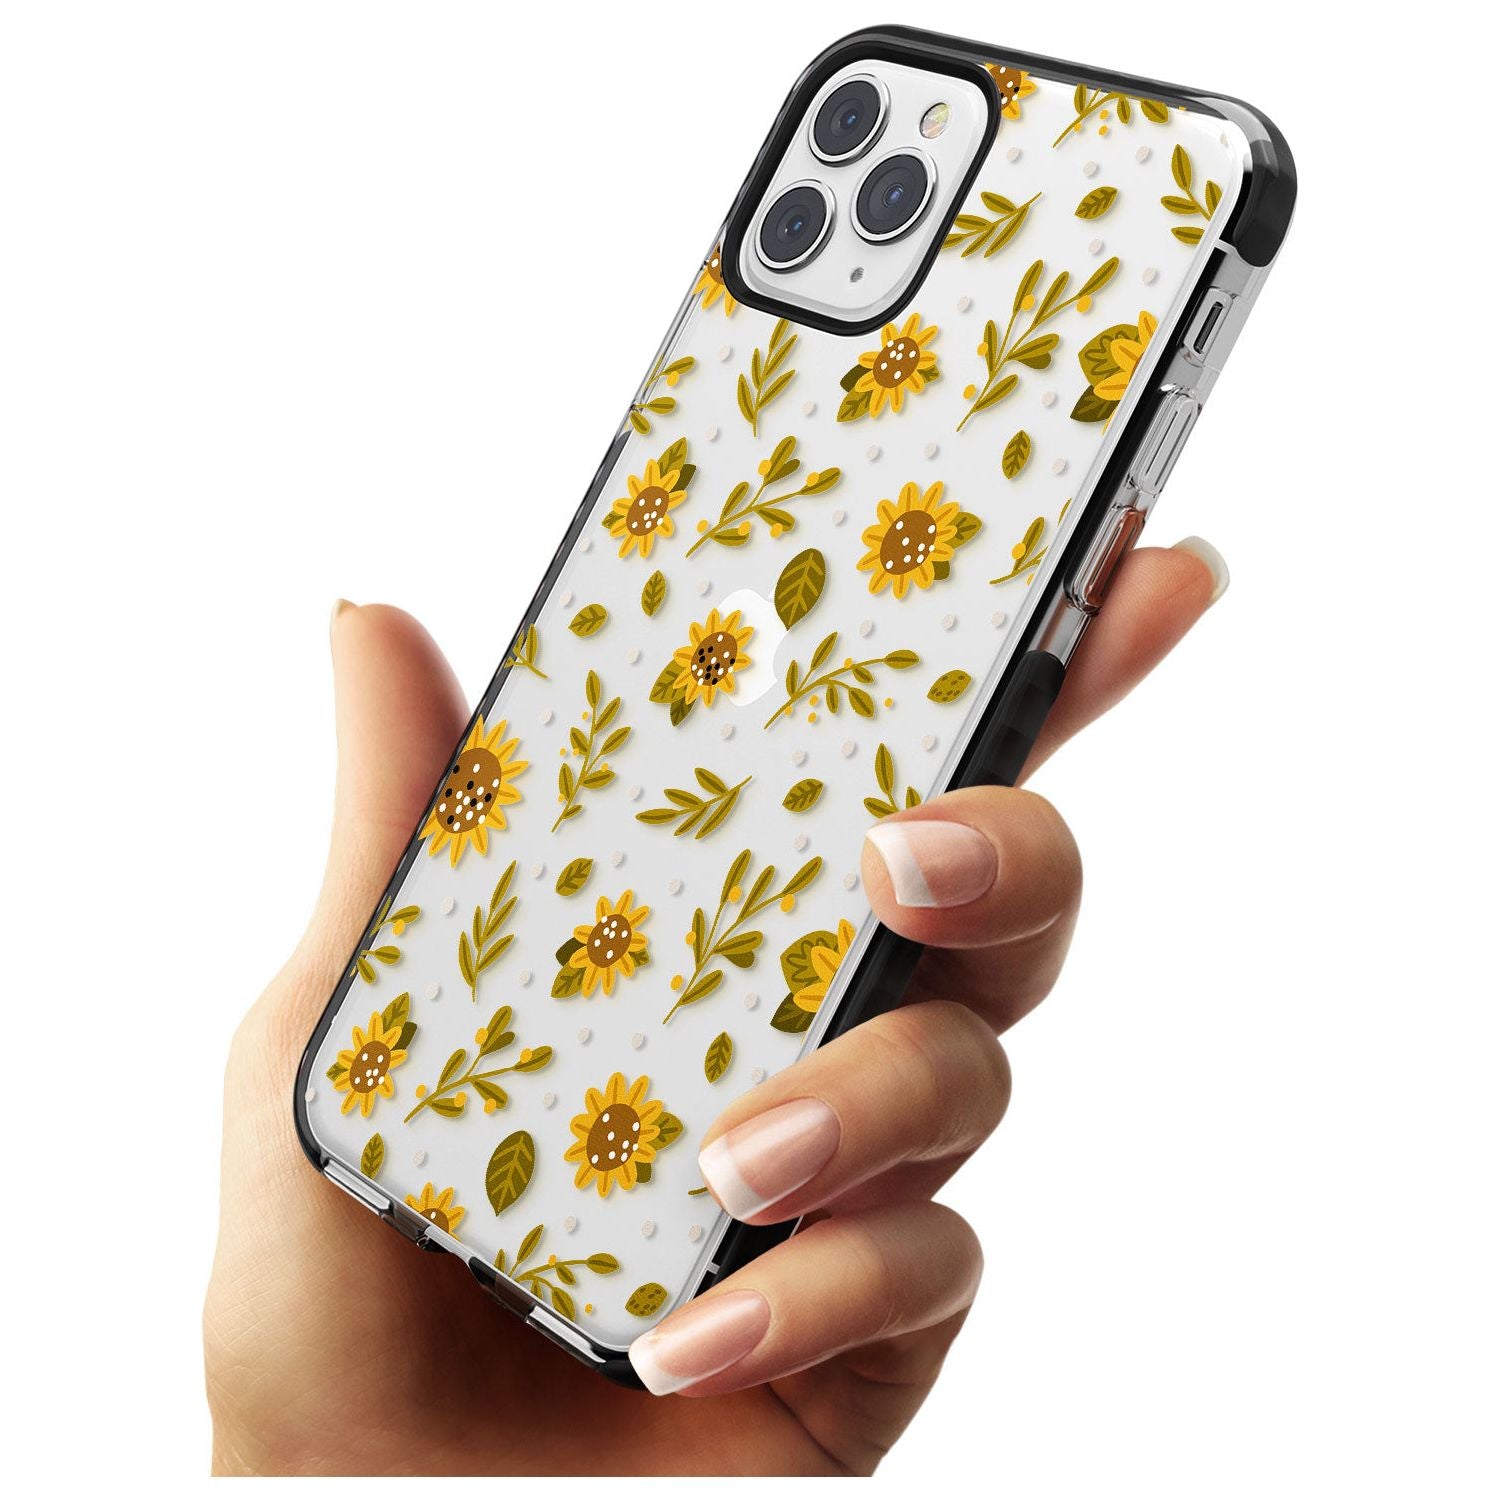 Sweet as Honey Patterns: Sunflowers (Clear) Black Impact Phone Case for iPhone 11 Pro Max